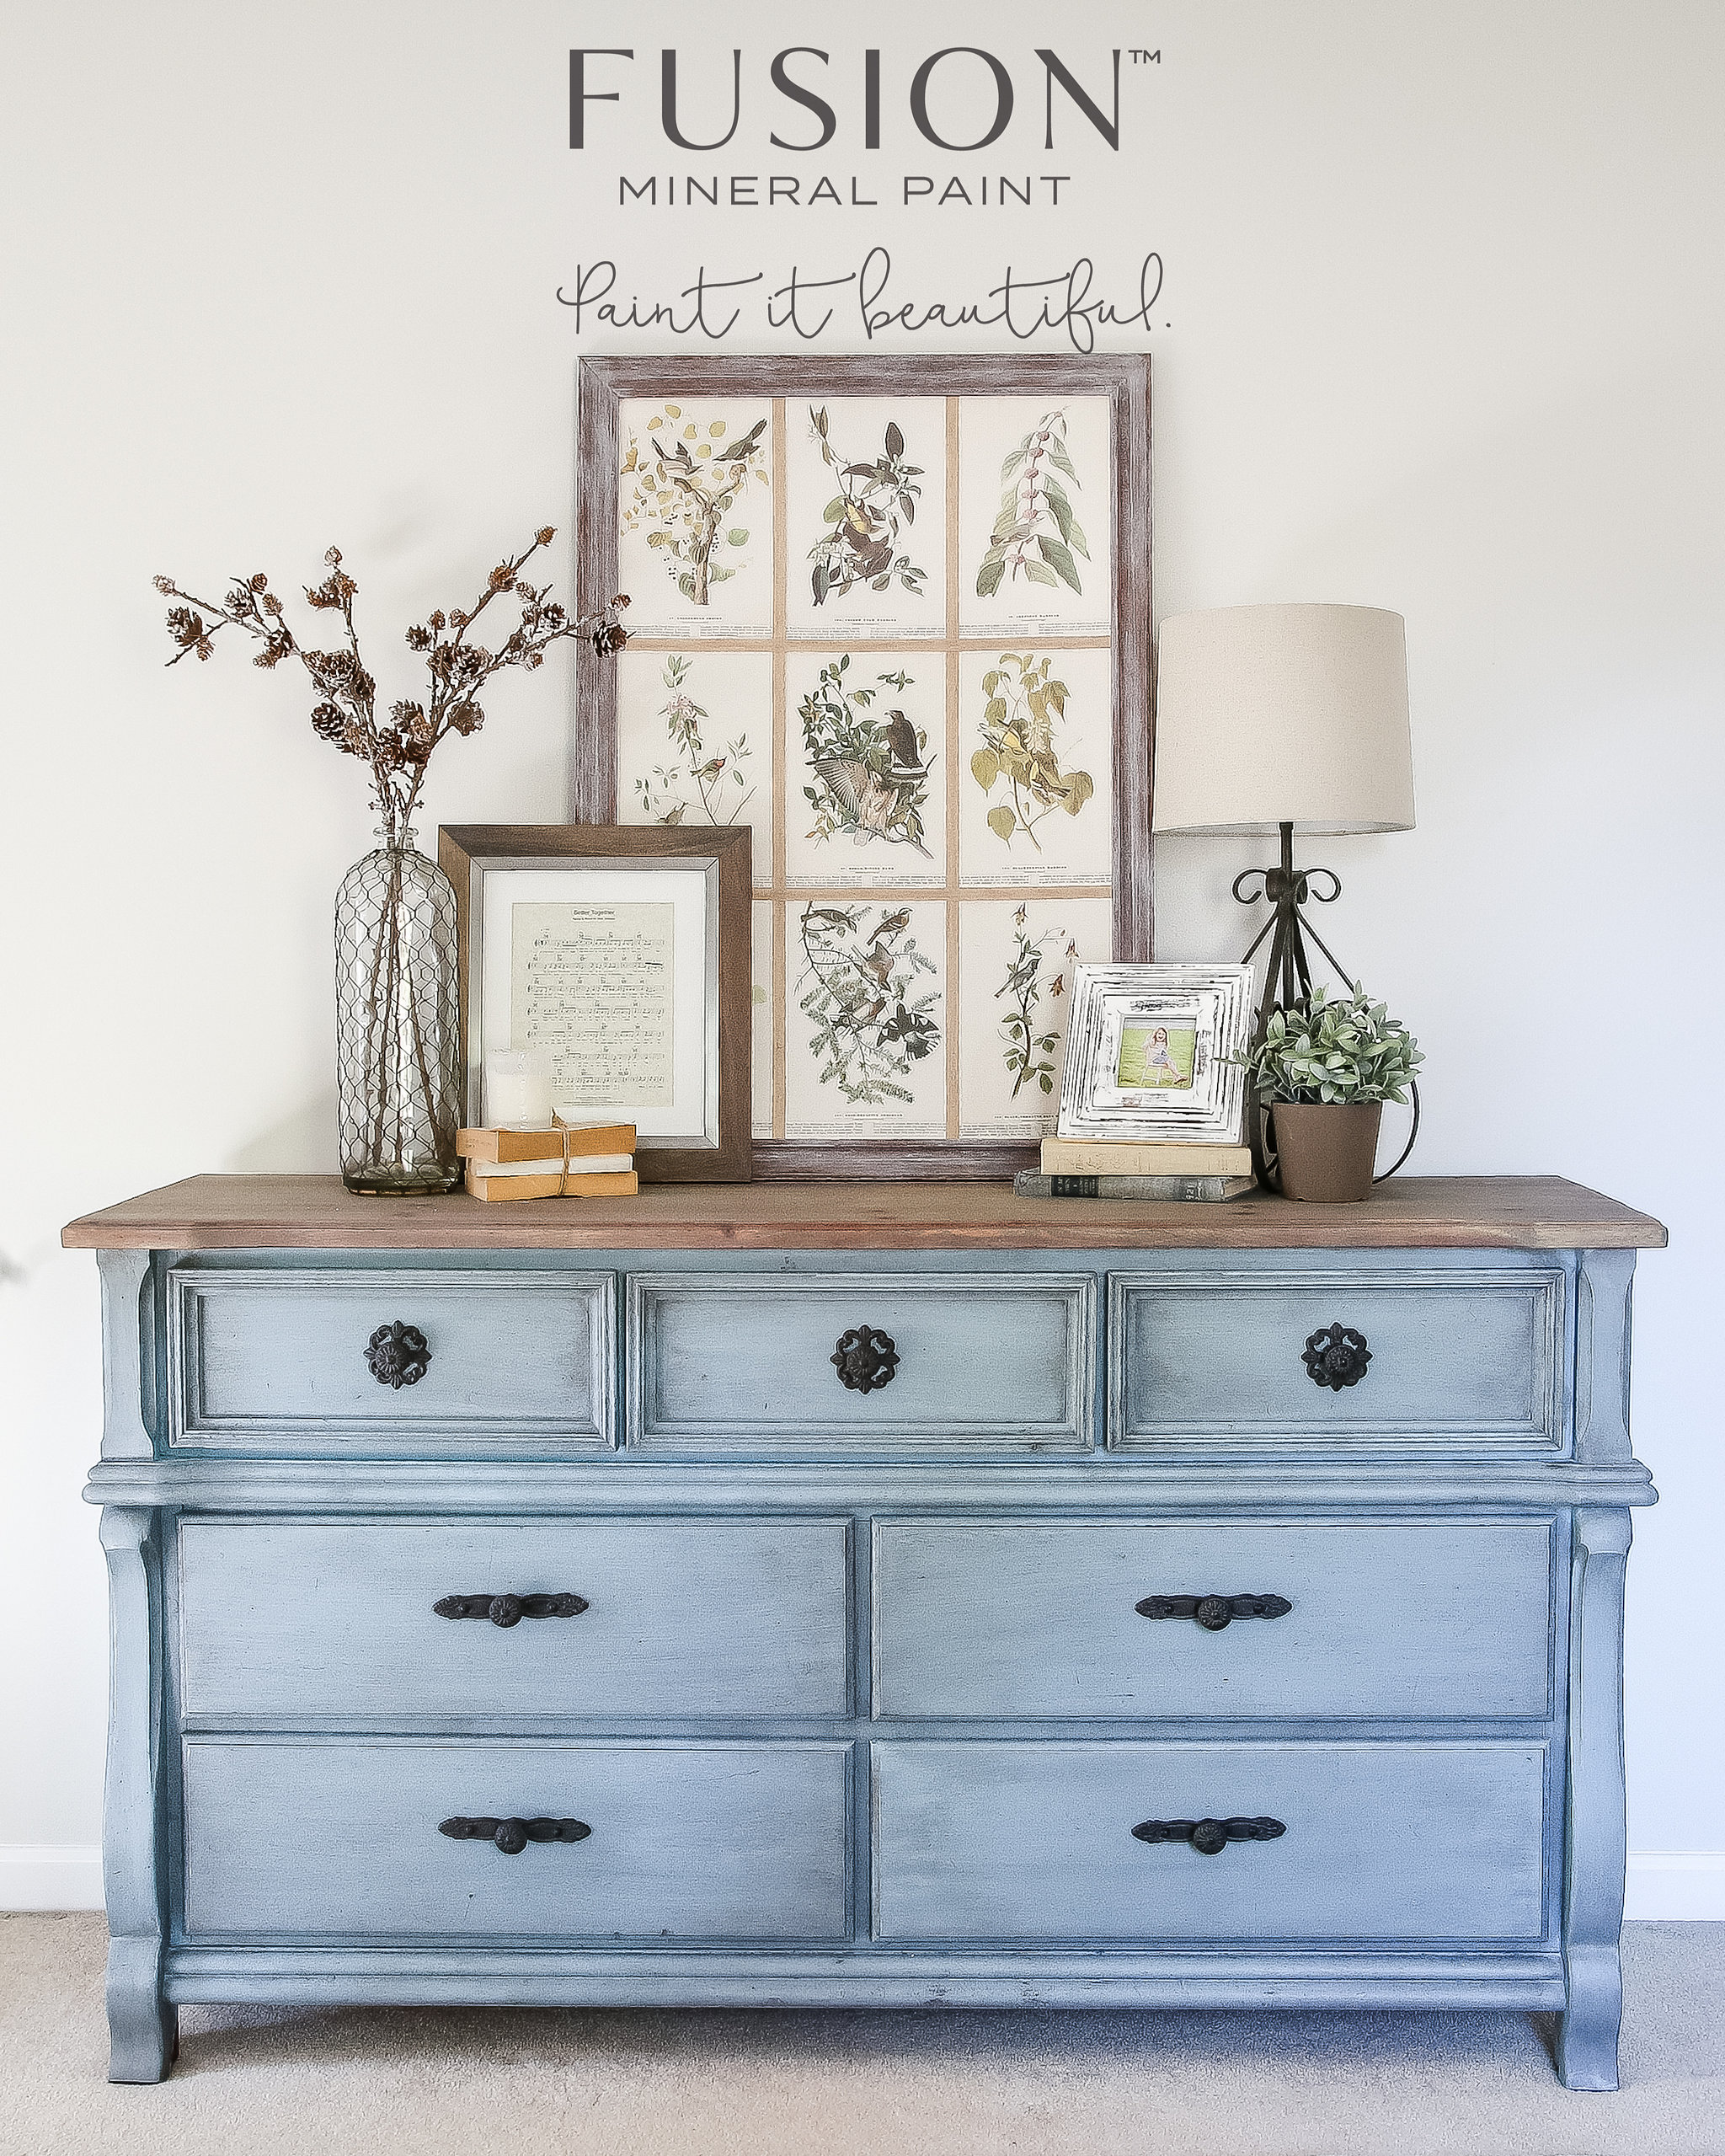 Get a gorgeous country shabby chic distressed finish, or sleek flawless smooth finish using the right tools and accessories by Fusion Mineral Paint.